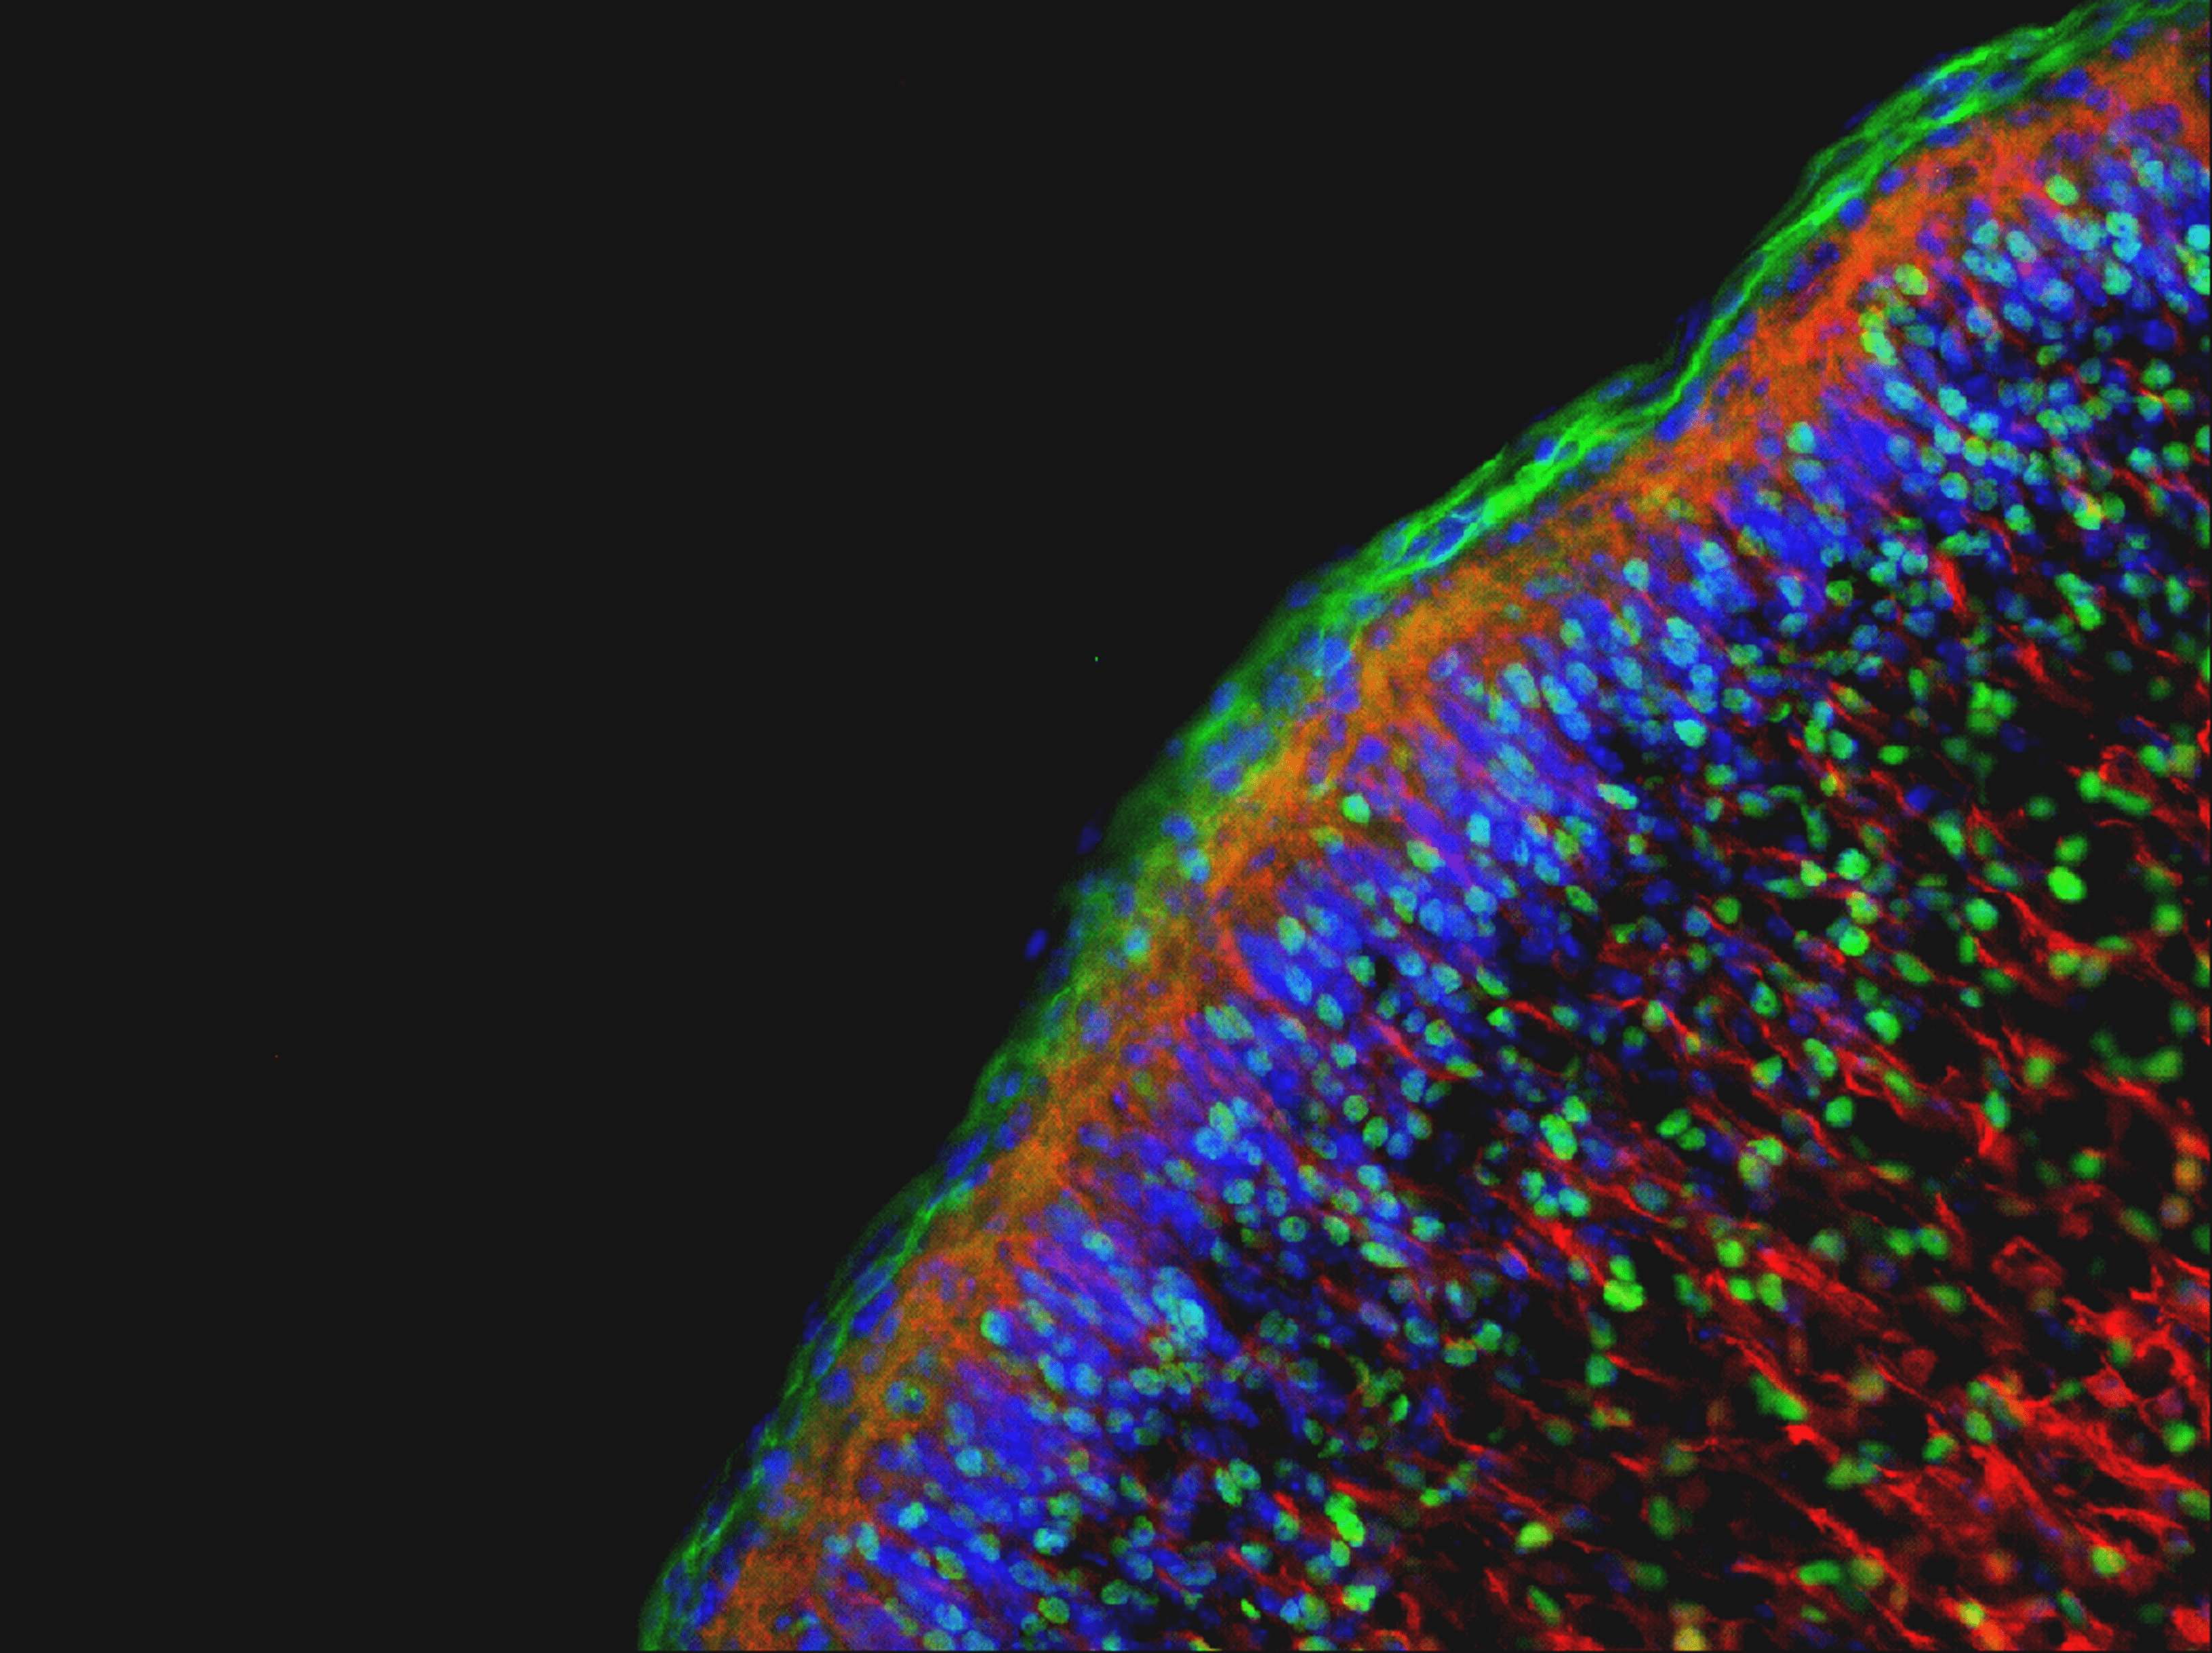 Fluorescent labeling of cells in slice of brain tissue